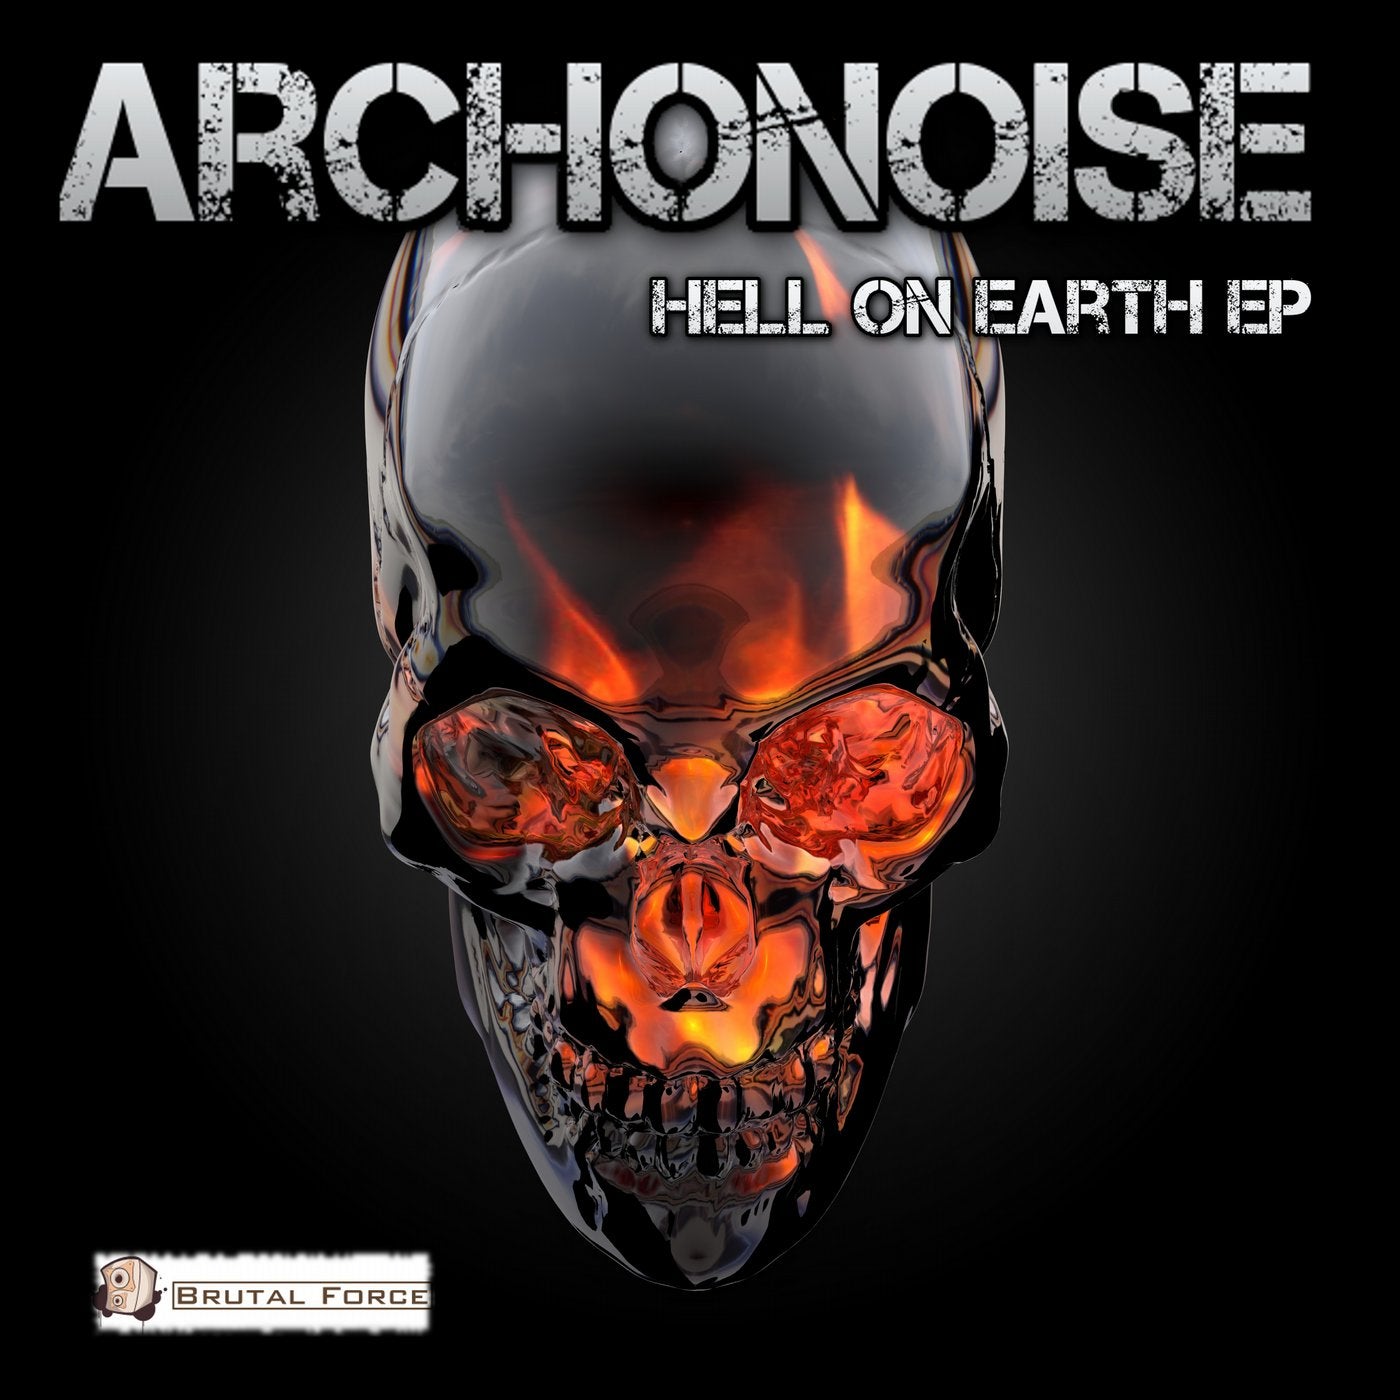 Hell on Earth EP